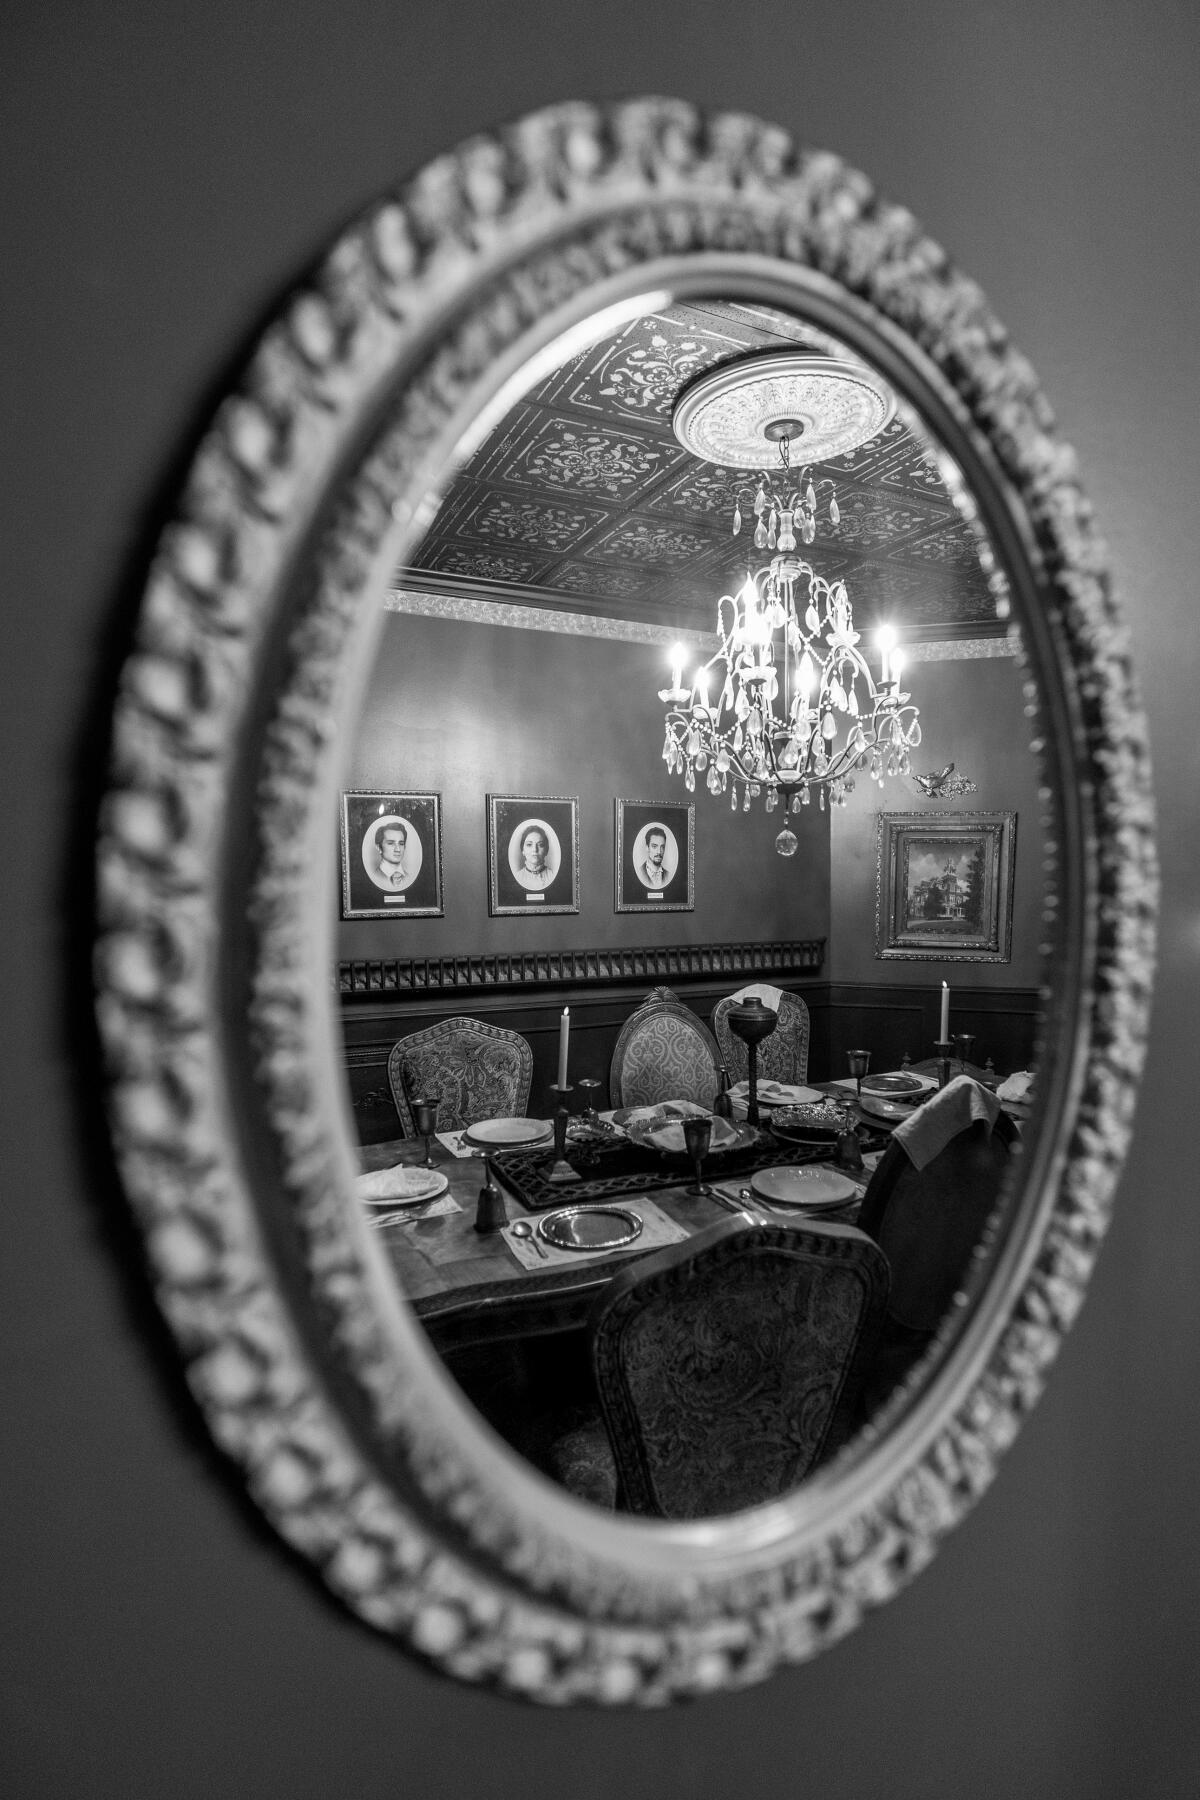 A mirror at the Ministry of Peculiarities reflects the view of a room.